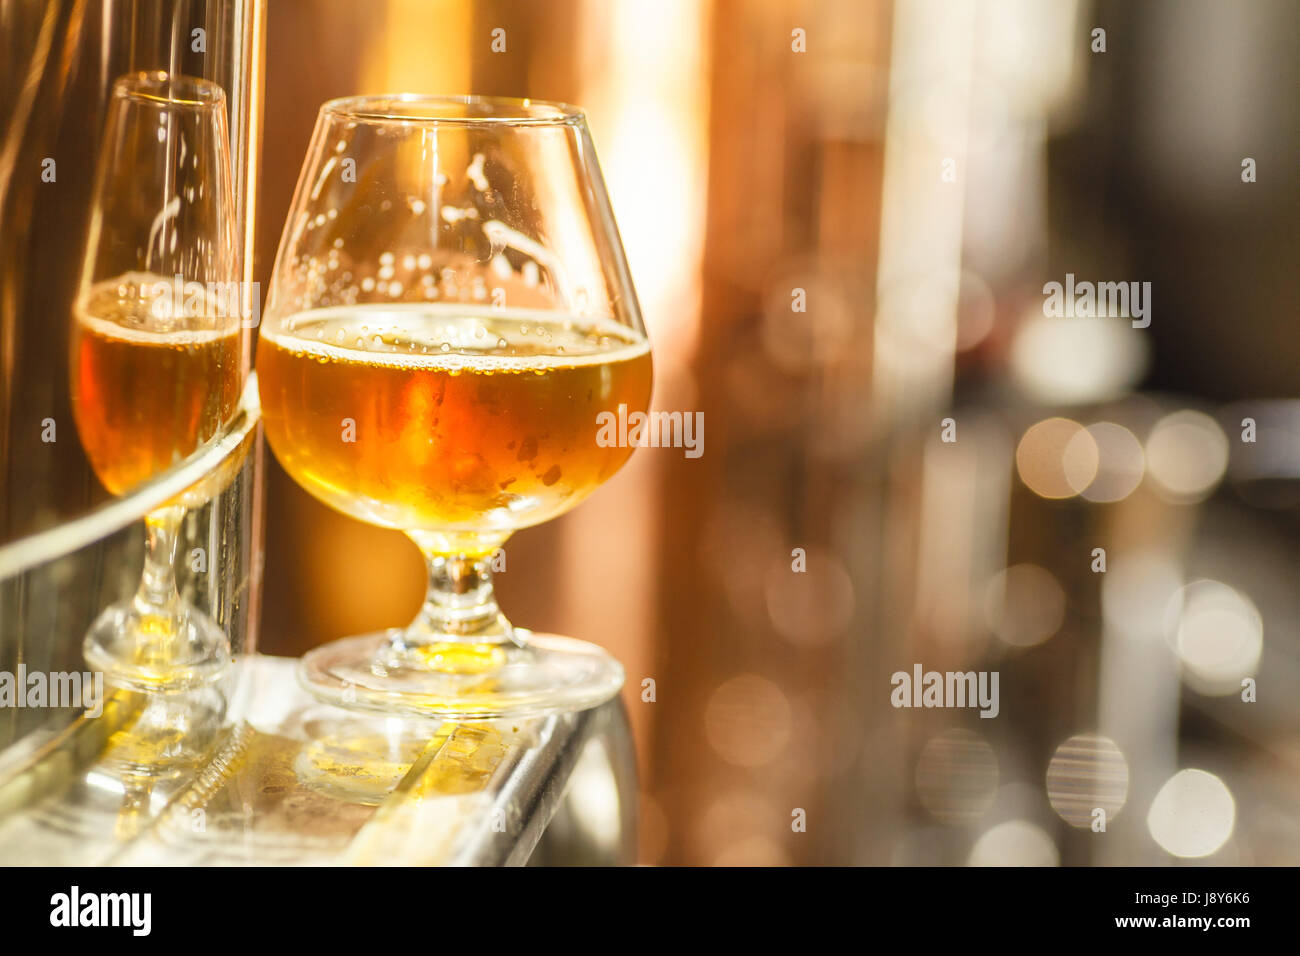 Glass with amber ale beer standing on a metal doorway of a copper lauter tun at a brewery Stock Photo